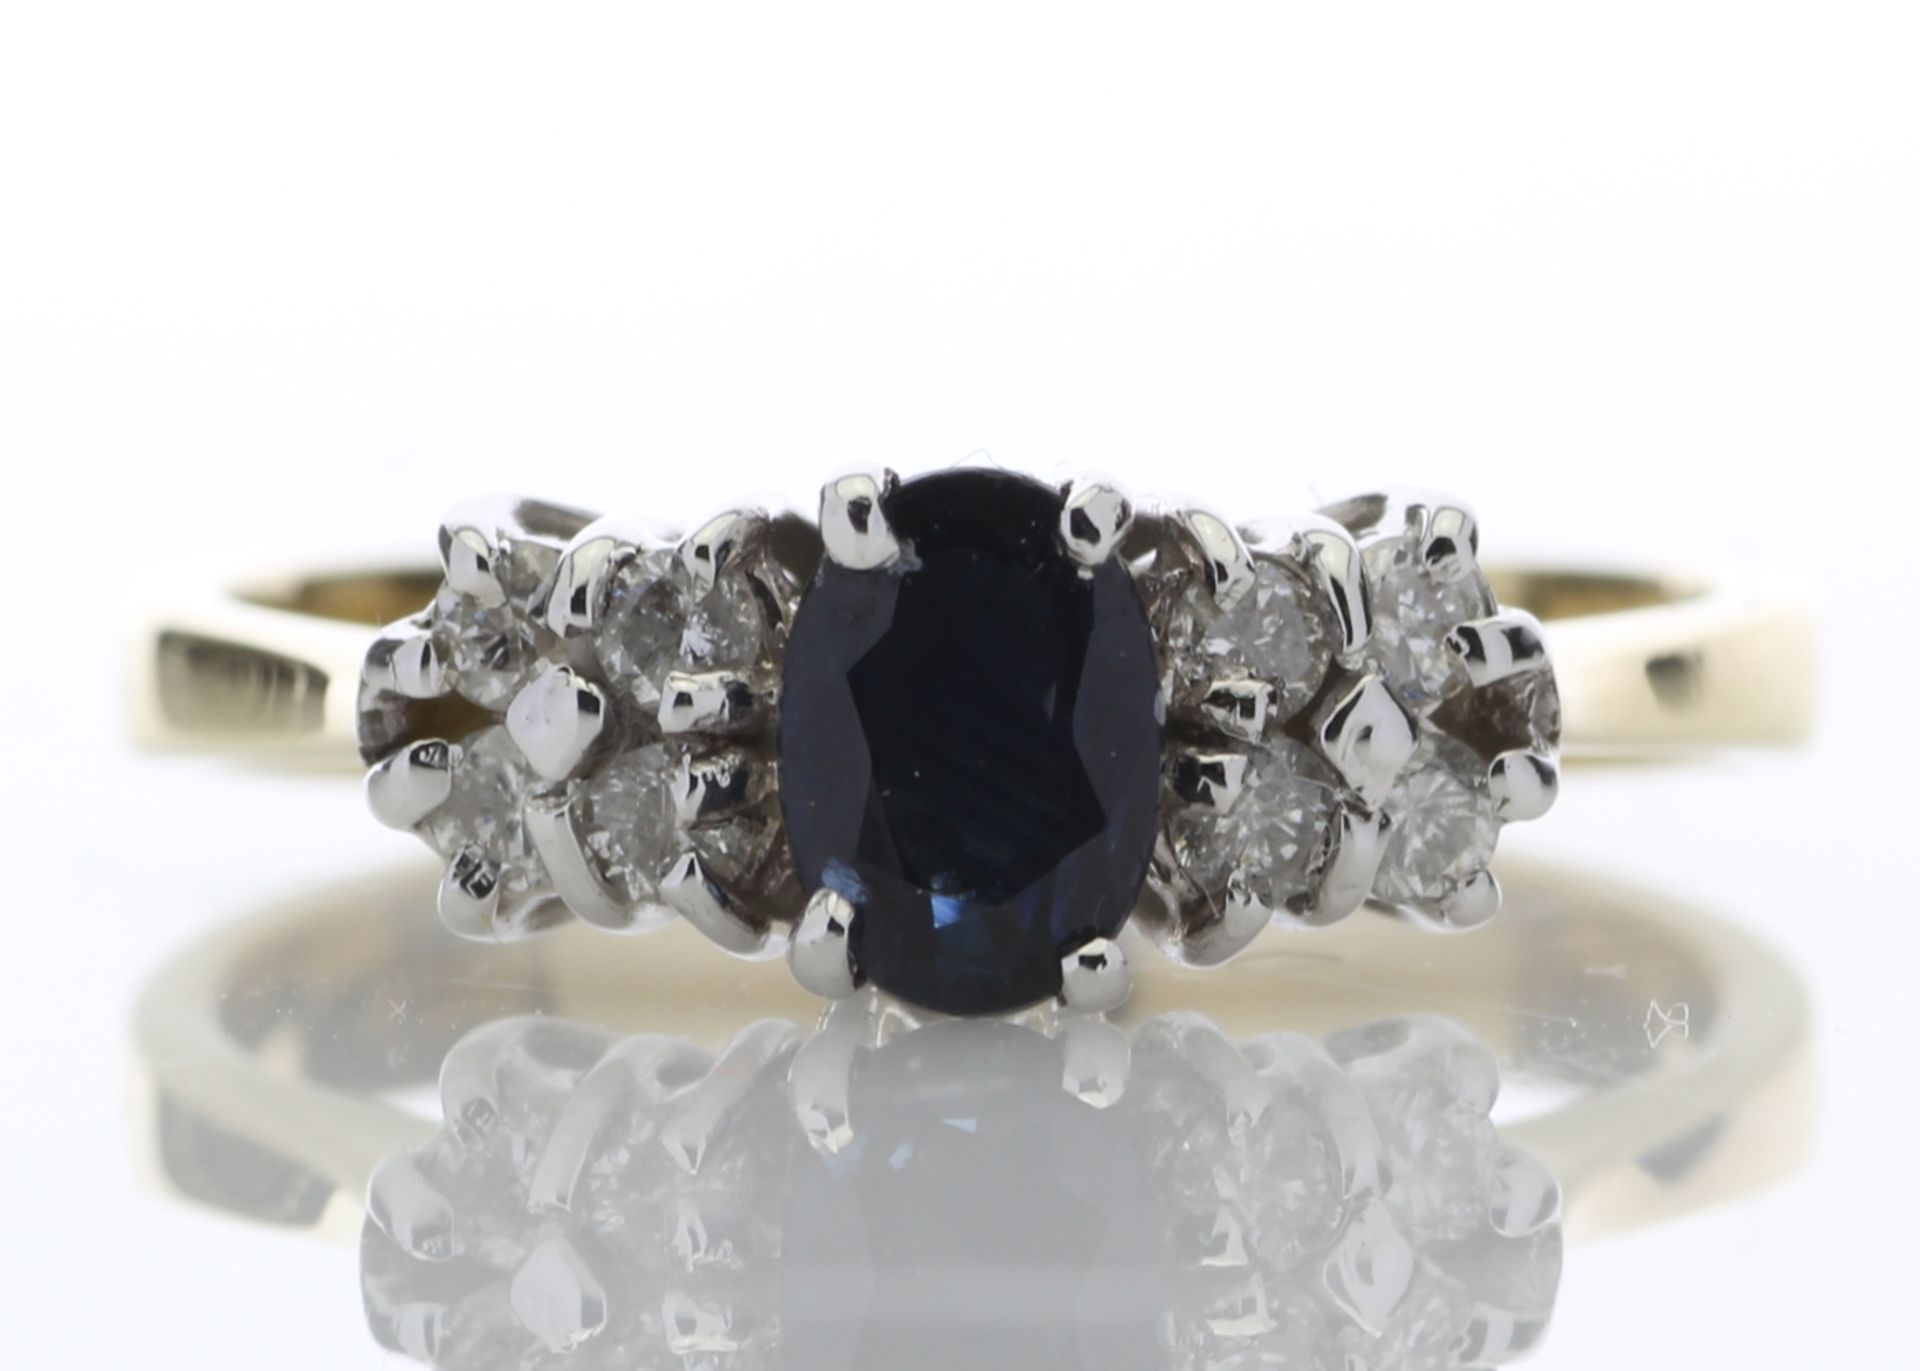 18ct Boat Shape Cluster Diamond Saphire Ring 0.50 Carats - Valued By GIE £7,990.00 - A beautiful